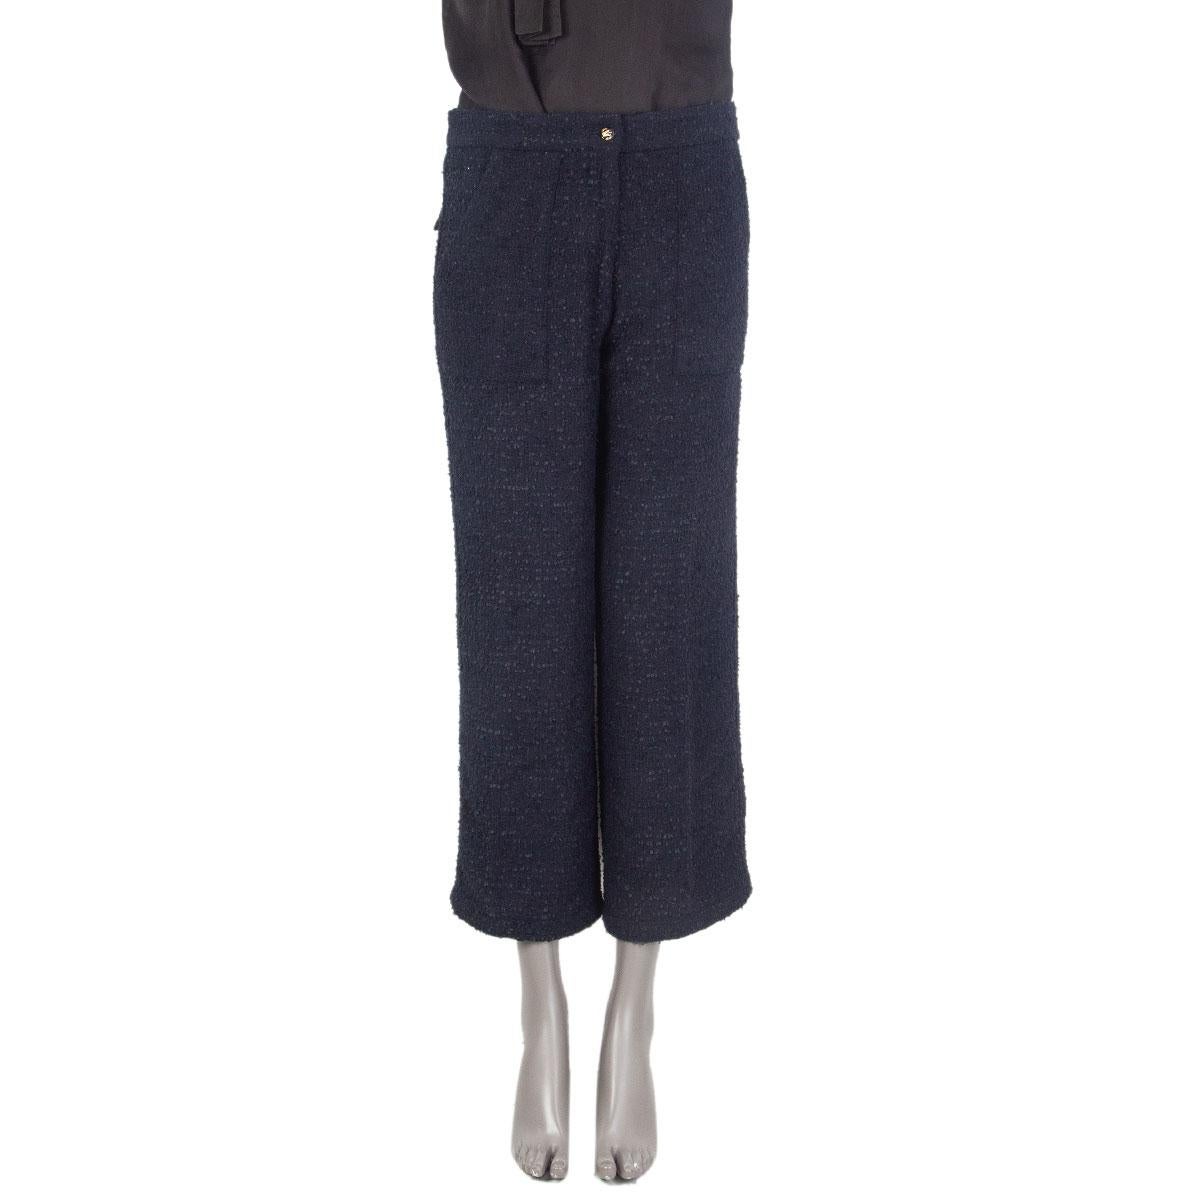 100% authentic Etro culotte pants in midnight blue bouclé in cotton (81%) and polyamide (19%) featuring signature gold-tone and dark blue Pegaso buttons. Two slit pockets at front and flap pockets at the back. Have been worn one and are in virtually